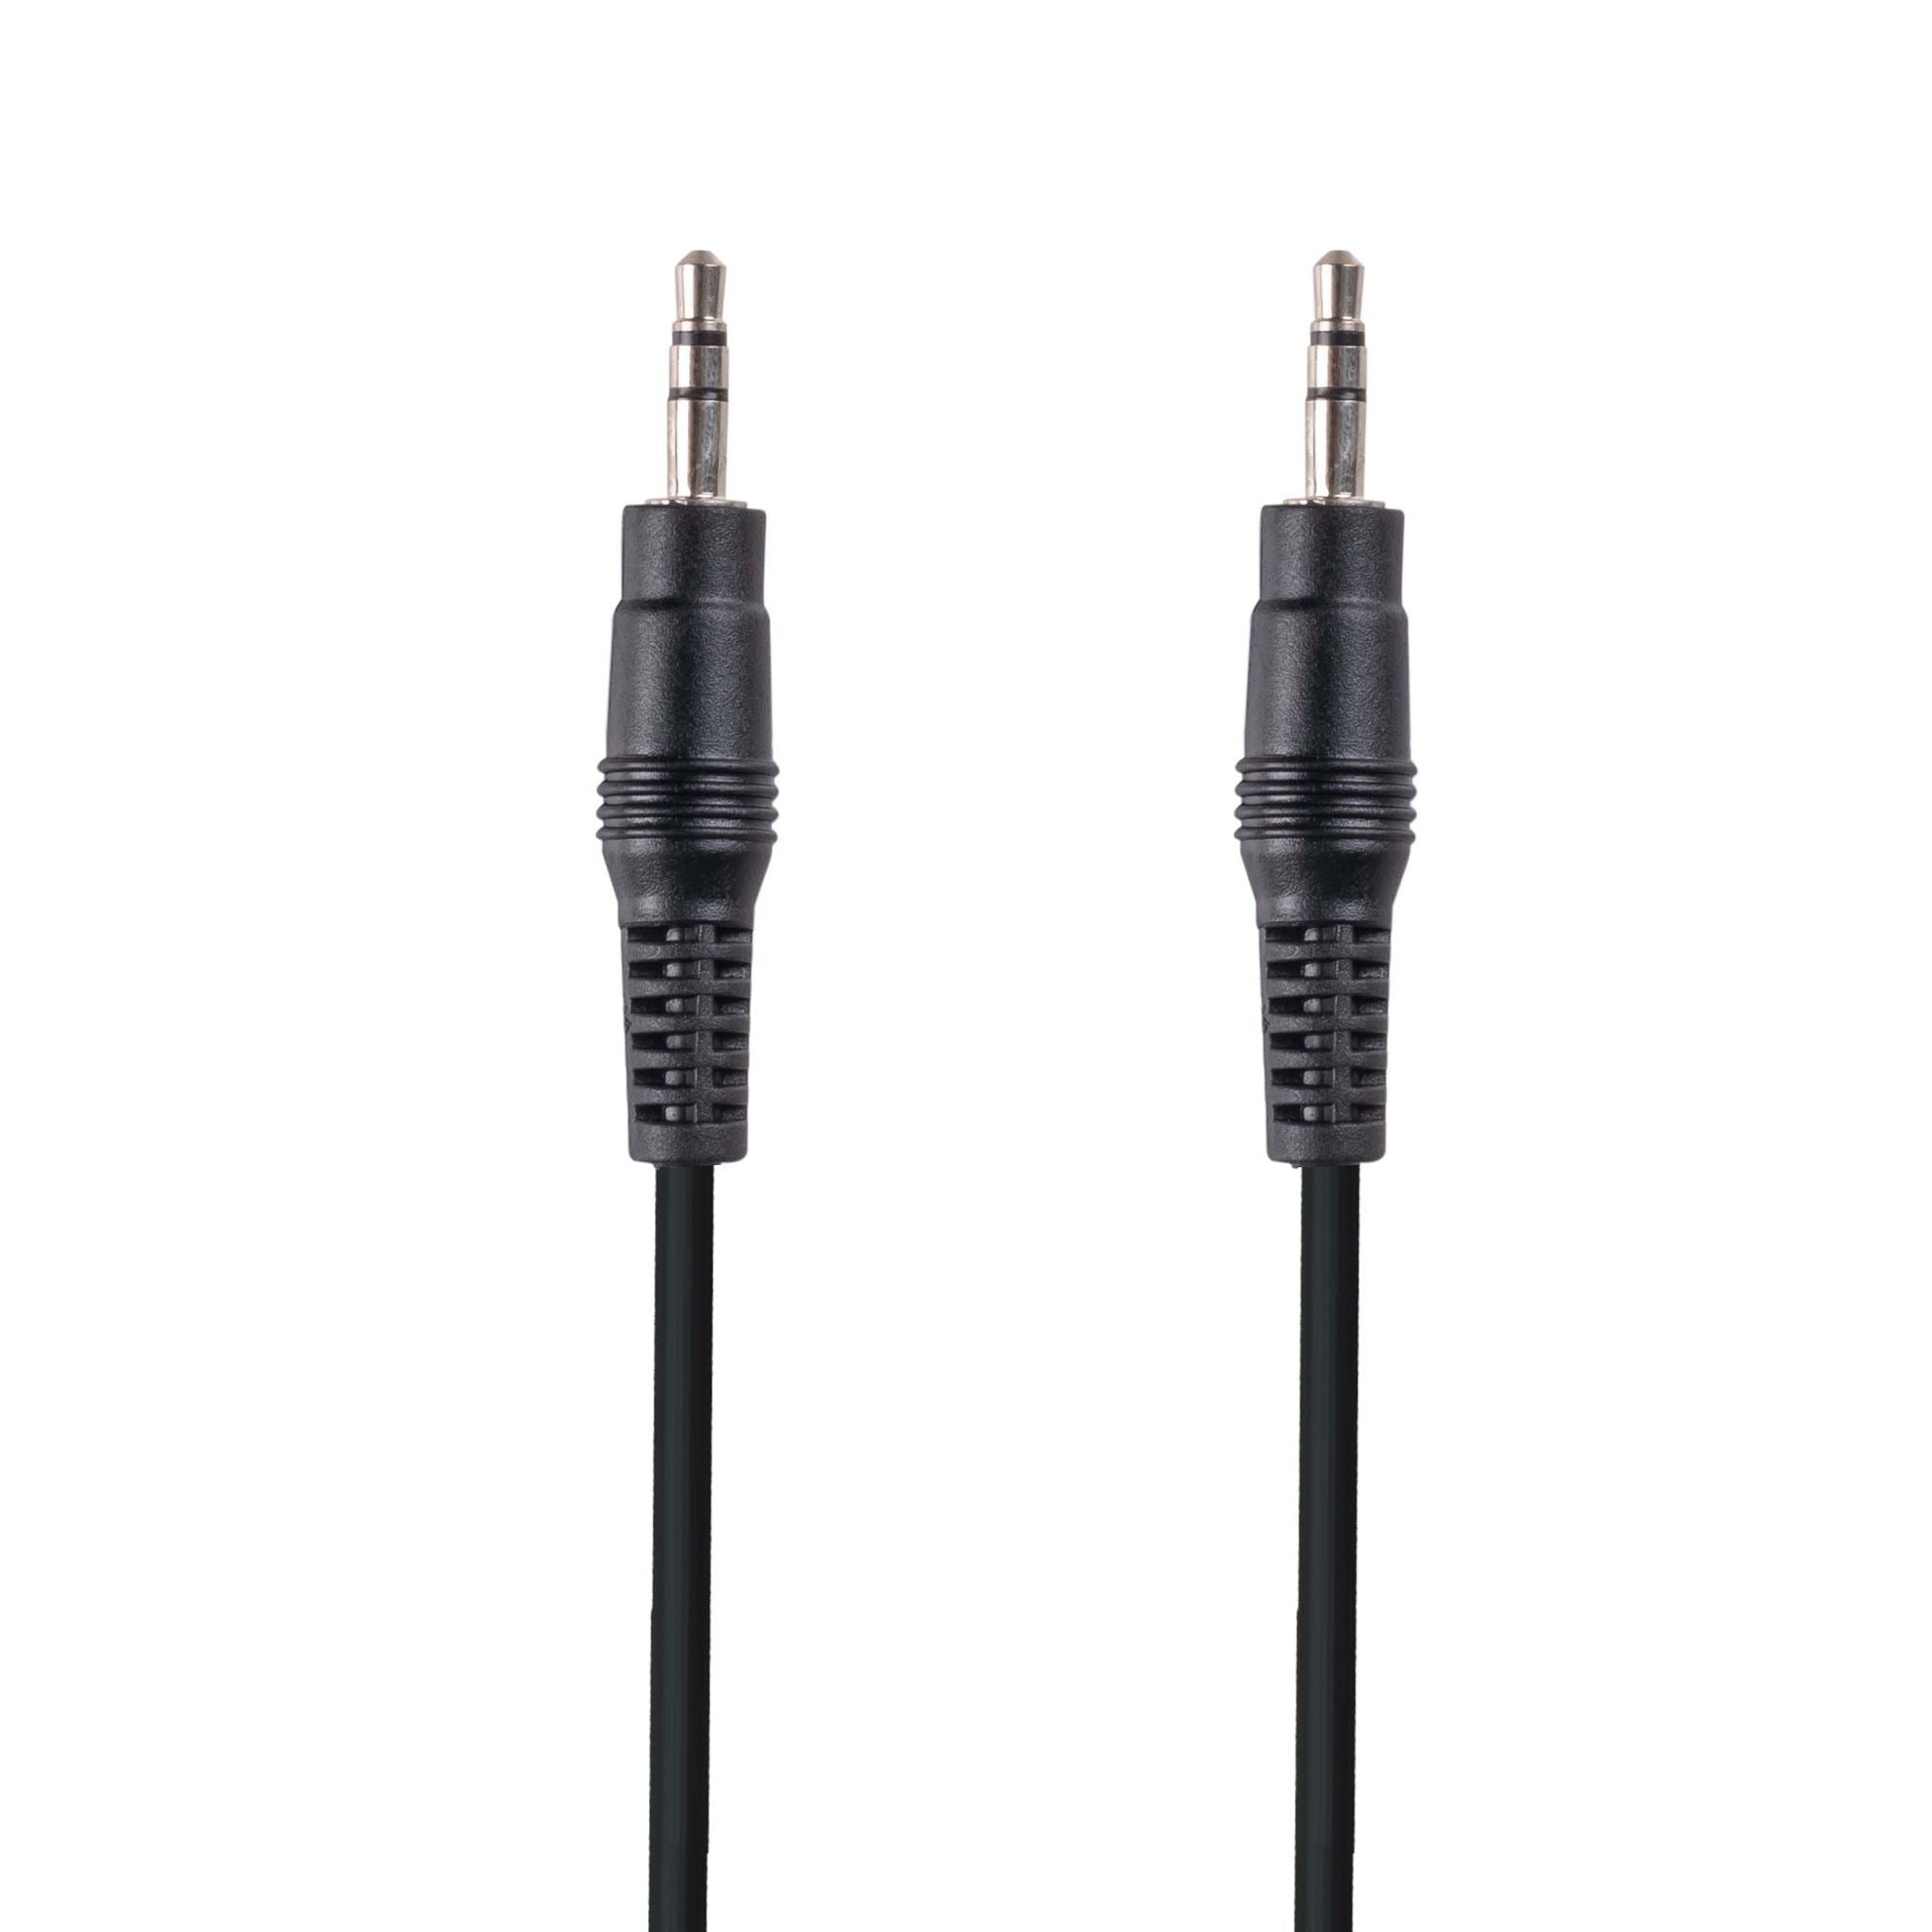 DYNAMIX_5M_Stereo_3.5mm_Plug_Stereo_MM_Cable 492